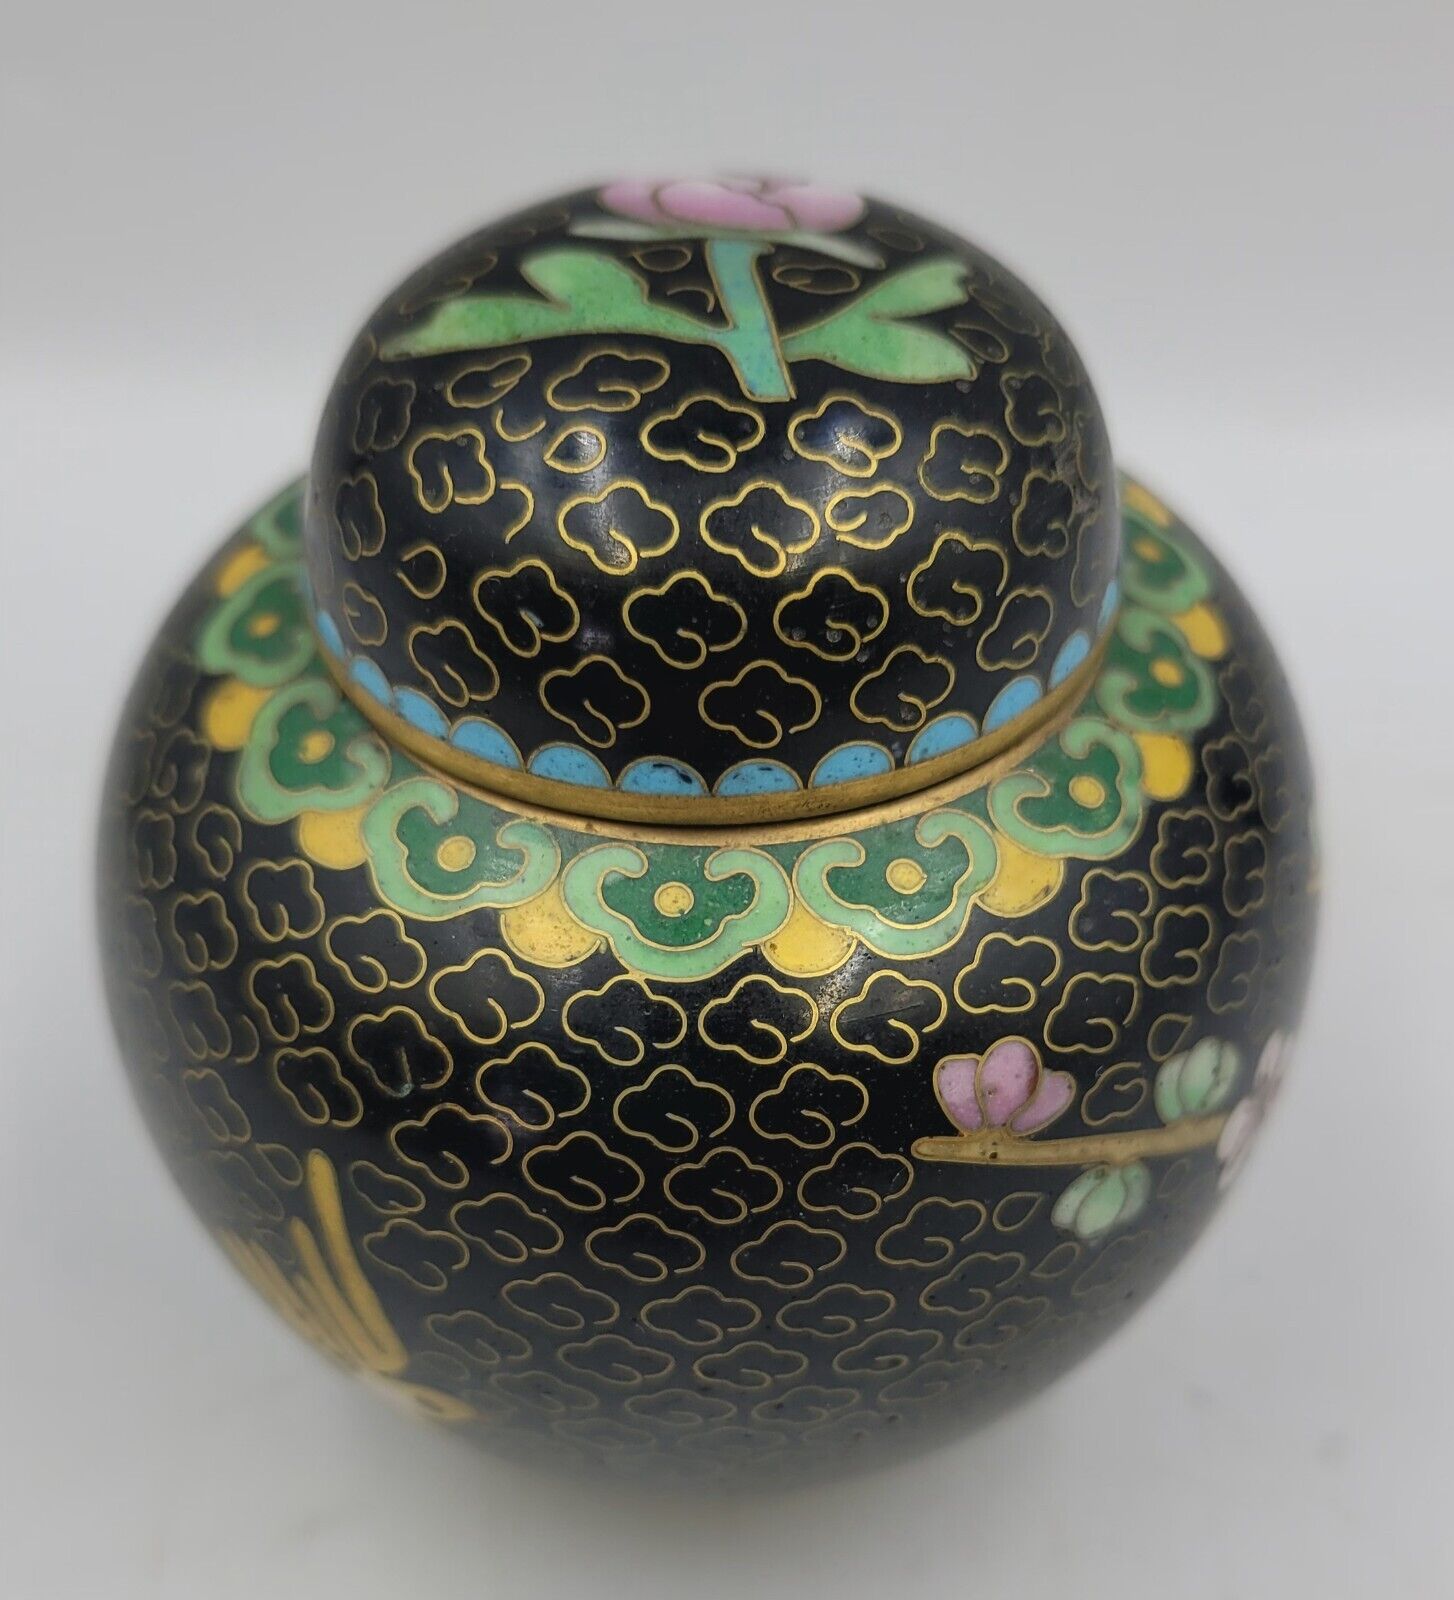 Vintage Chinese Cloisonne Covered Ginger Pot Jar Black with Flowers